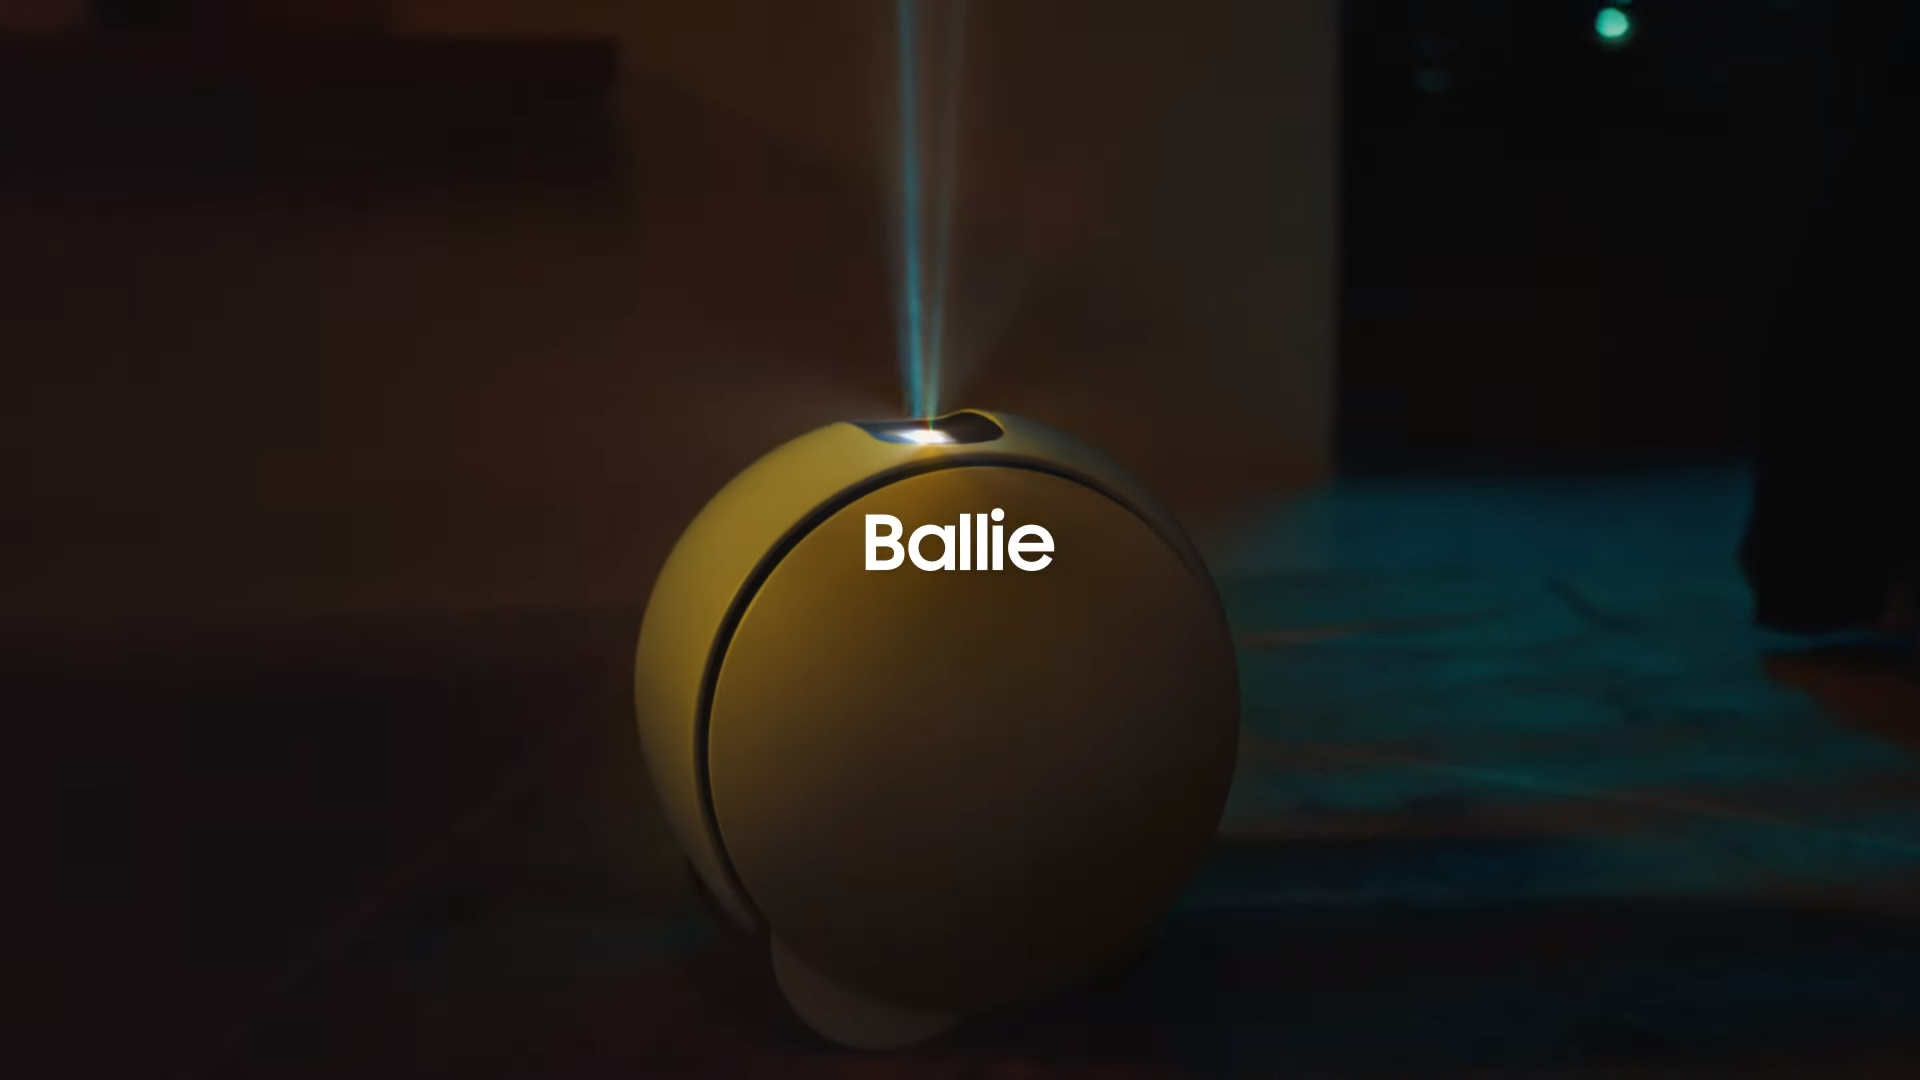 Ballie, Samsung's home robot, is back with a bang